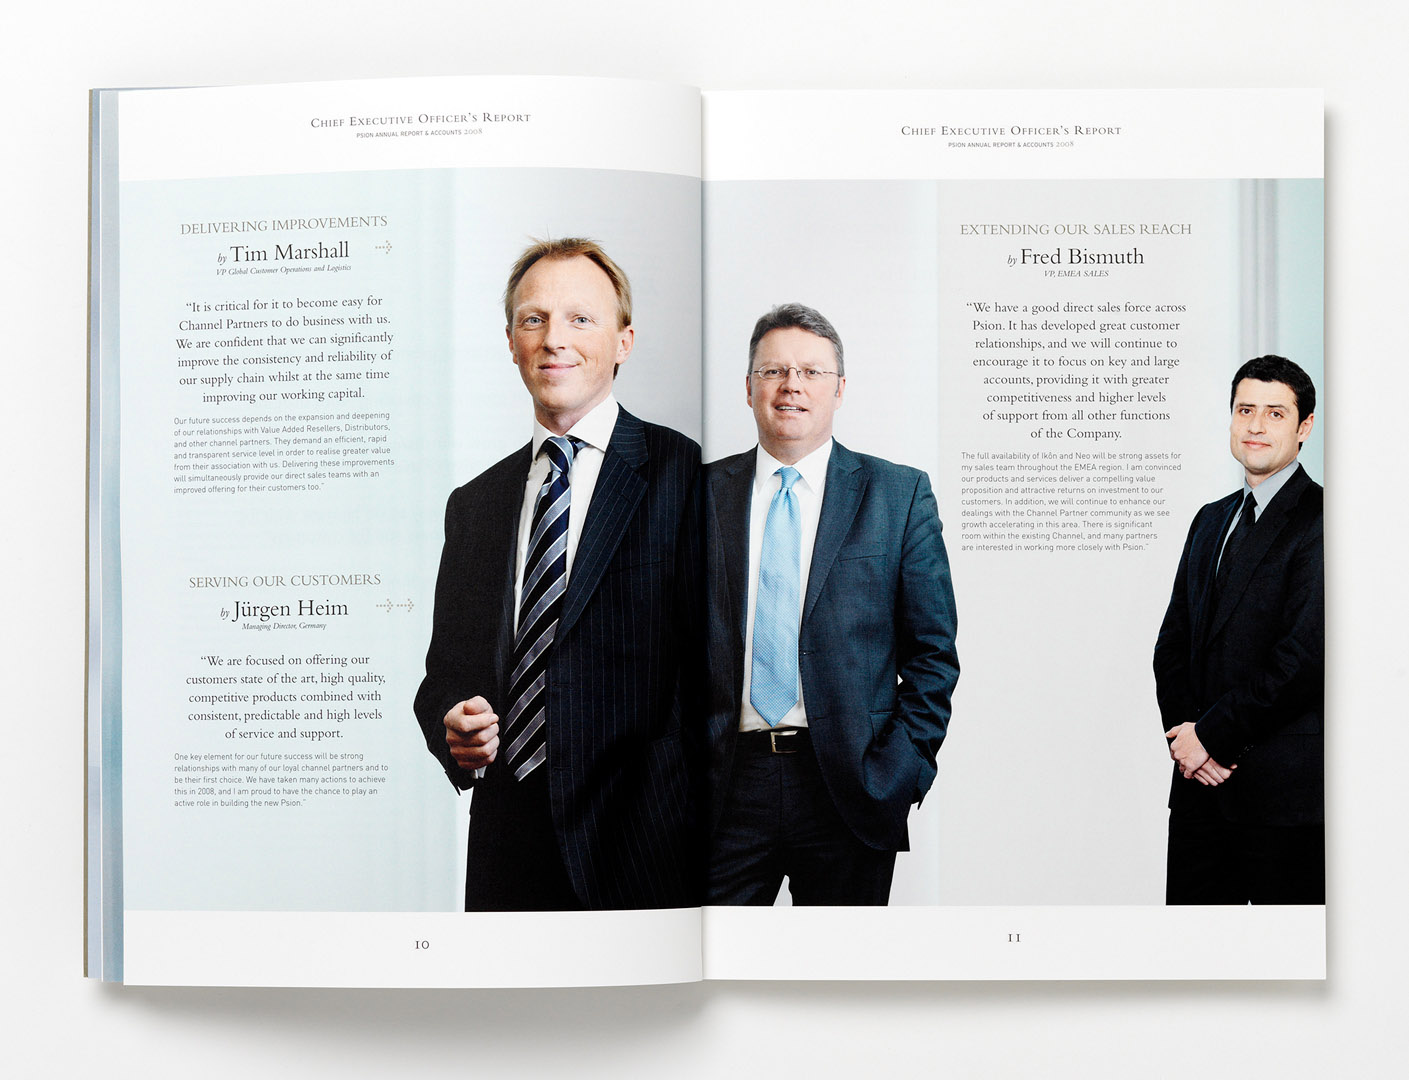 Annual Report spread featuring three 3/4 length portraits